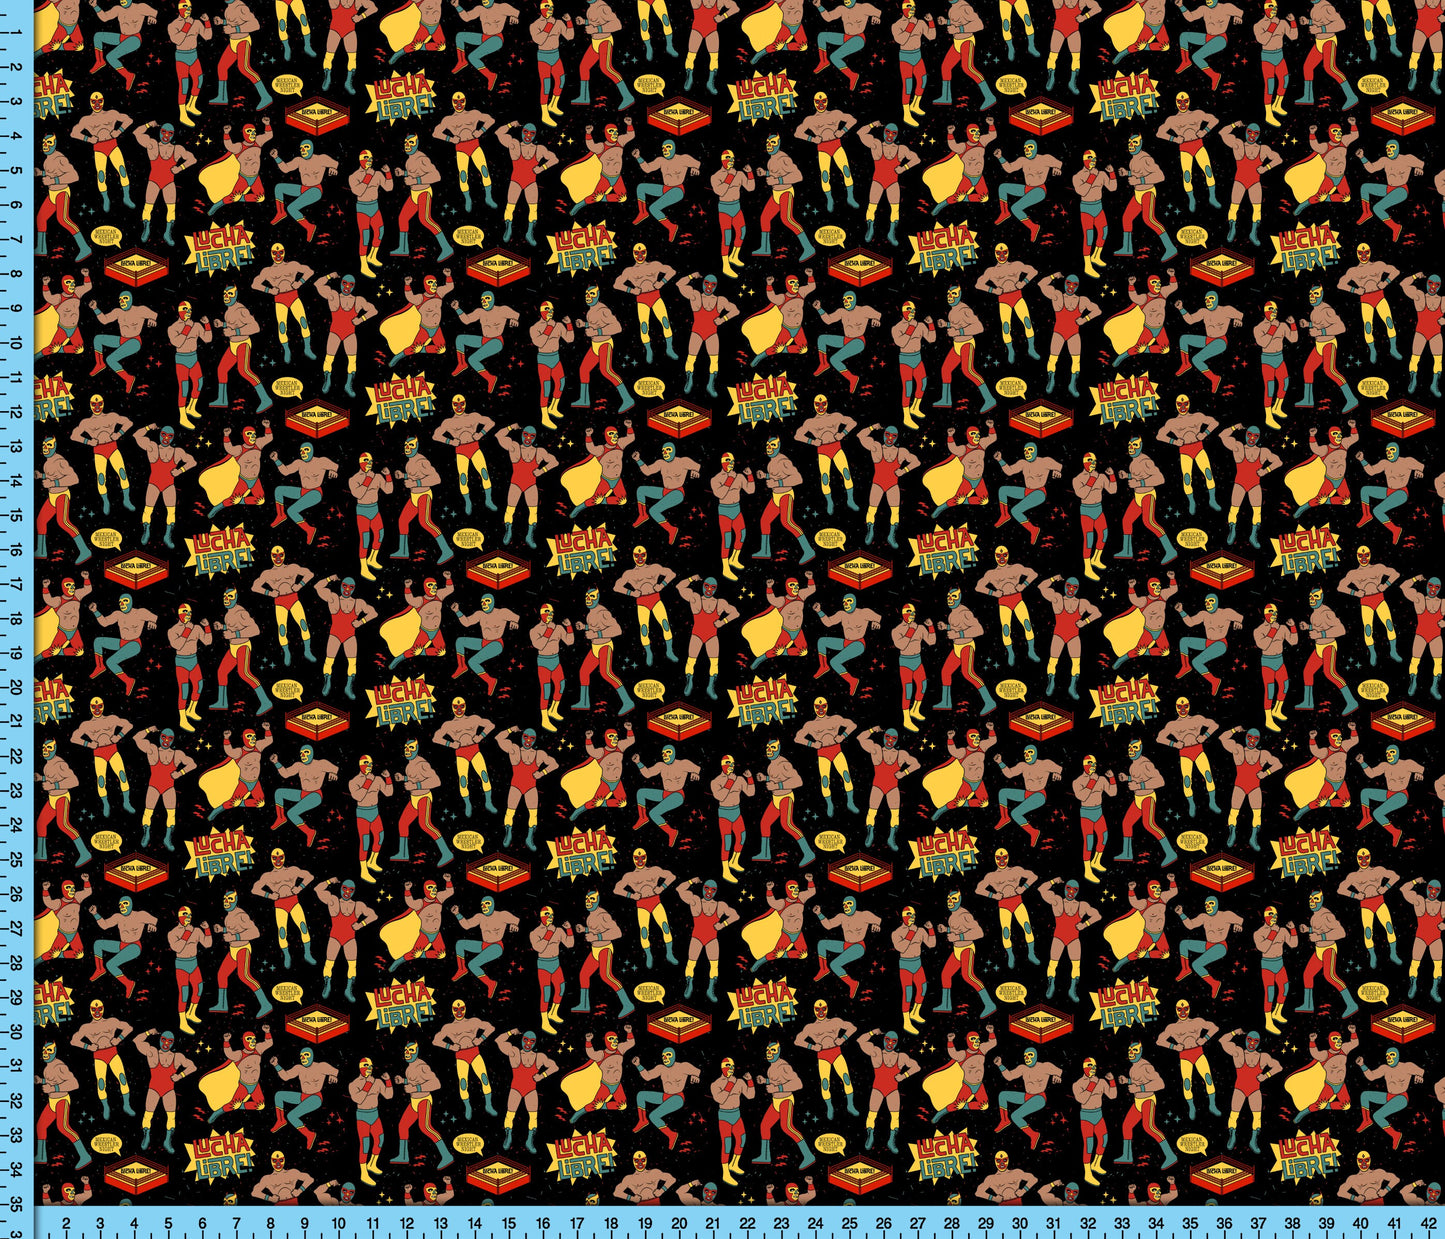 Lucha Libre Mexican Wrestler Fabric By The Yard